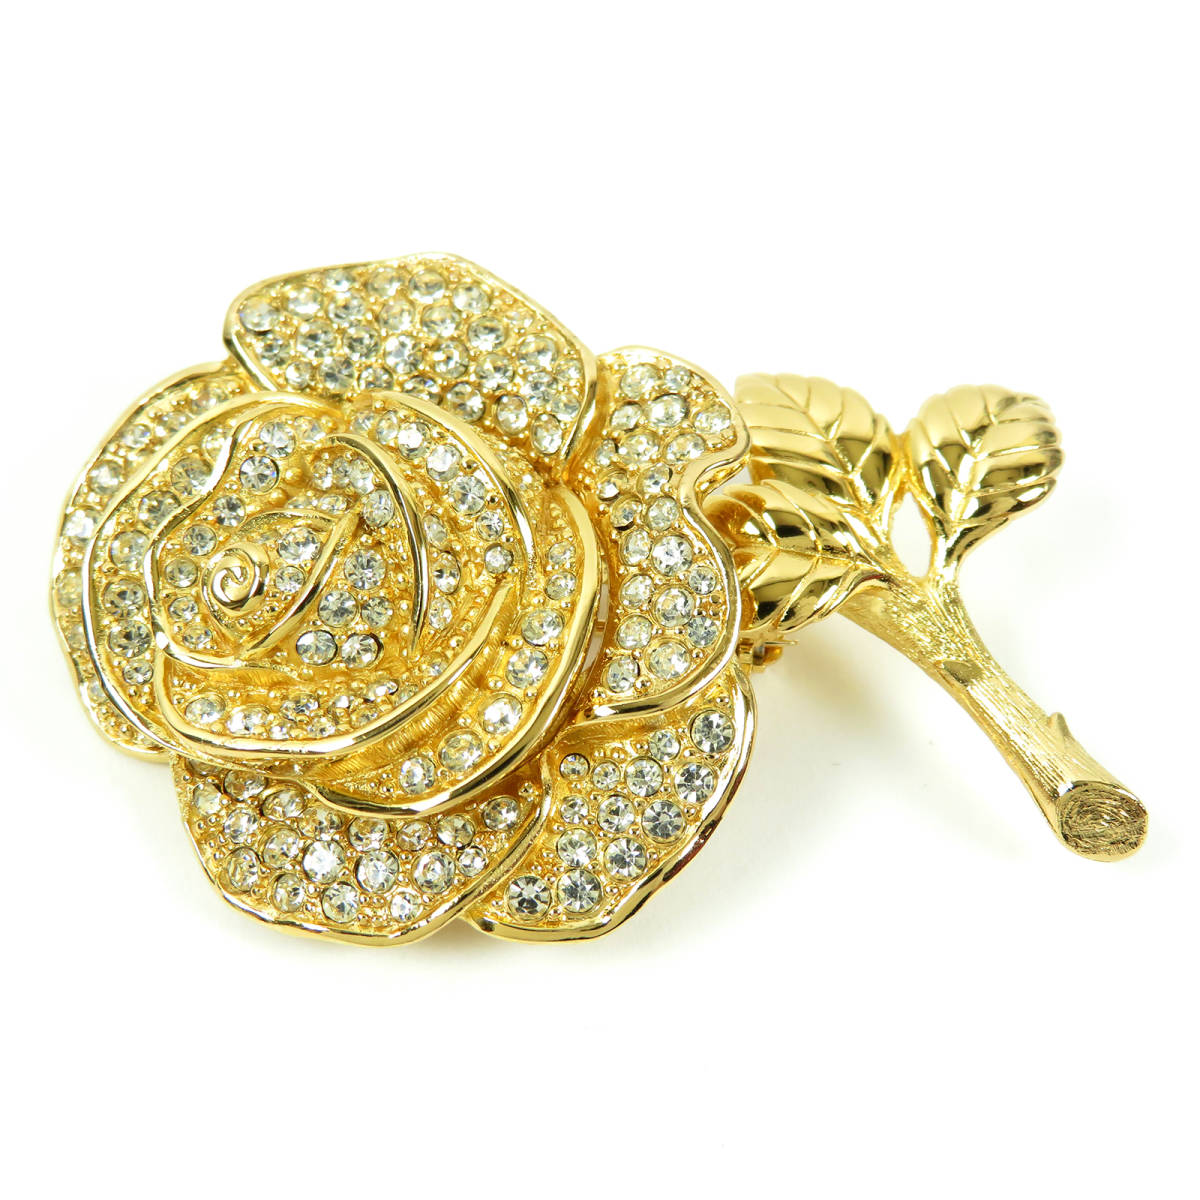  ultimate beautiful goods Vintage Christian Dior Christian Dior rose brooch rhinestone pave Gold color rose flower 